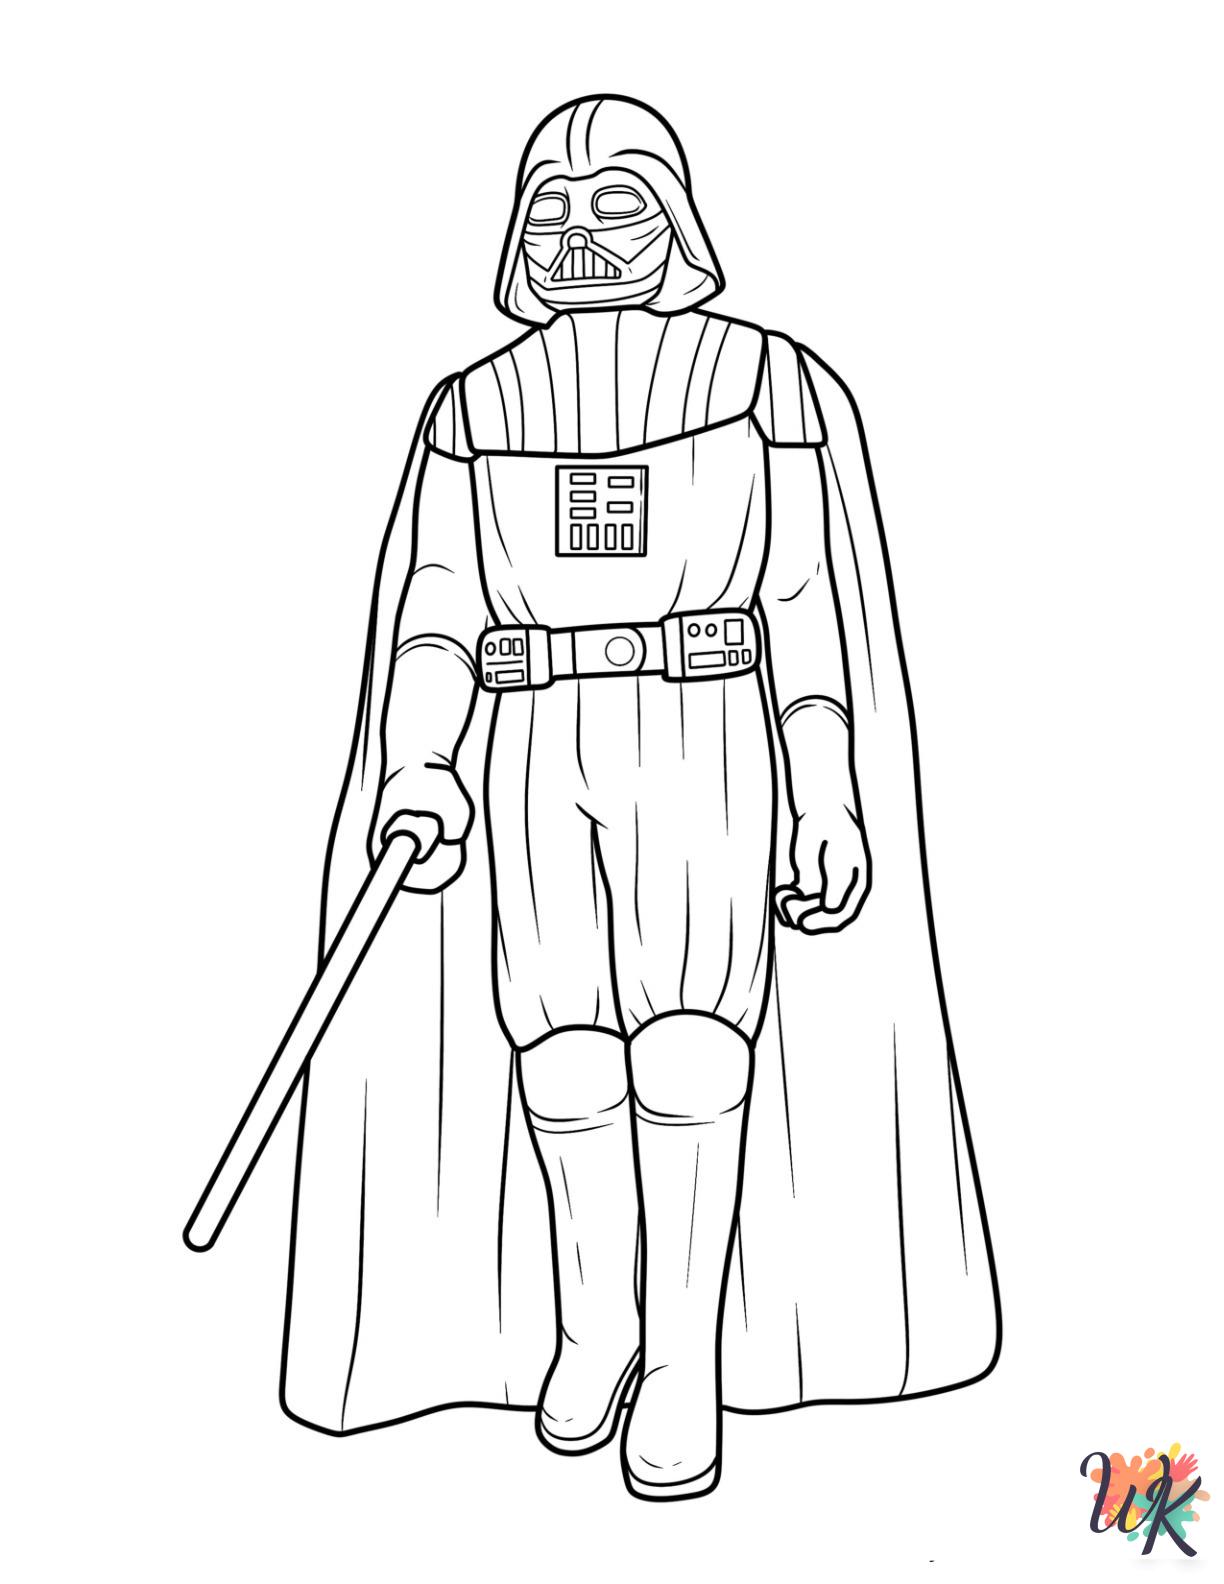 Darth Vader cards coloring pages